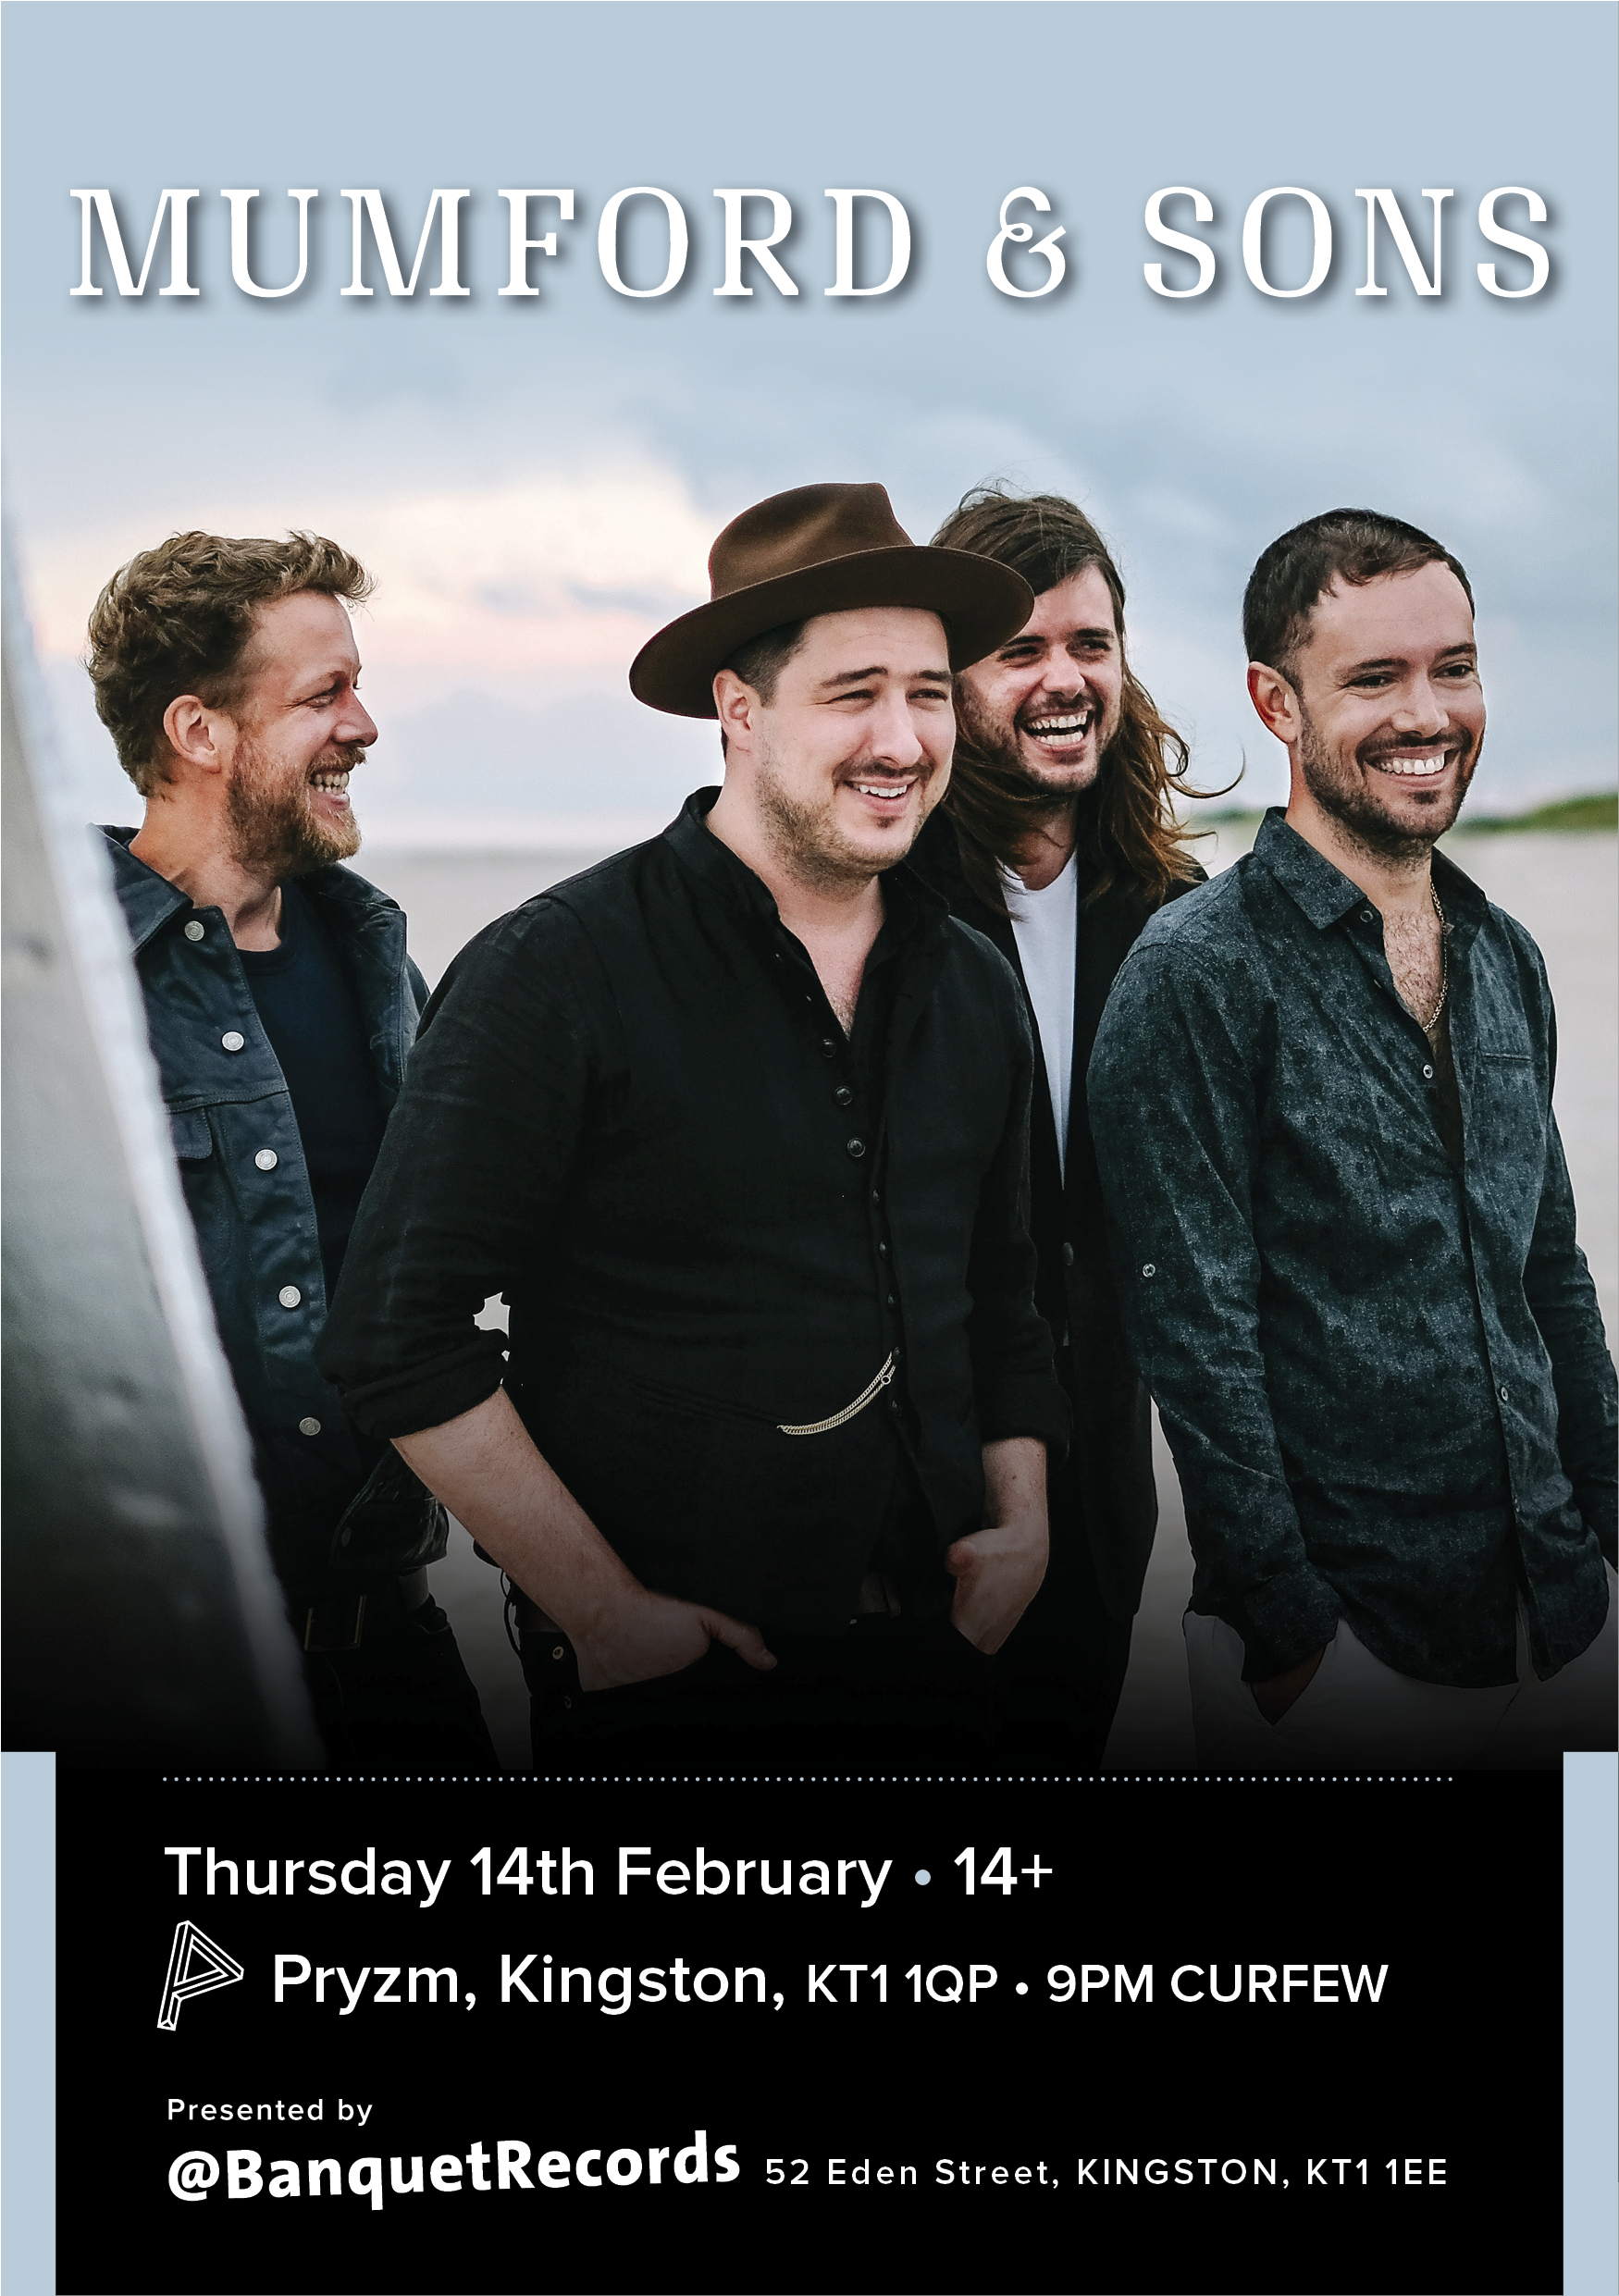 Mumford & Sons - Mumford And Sons 2018 (2481x2481), Png Download